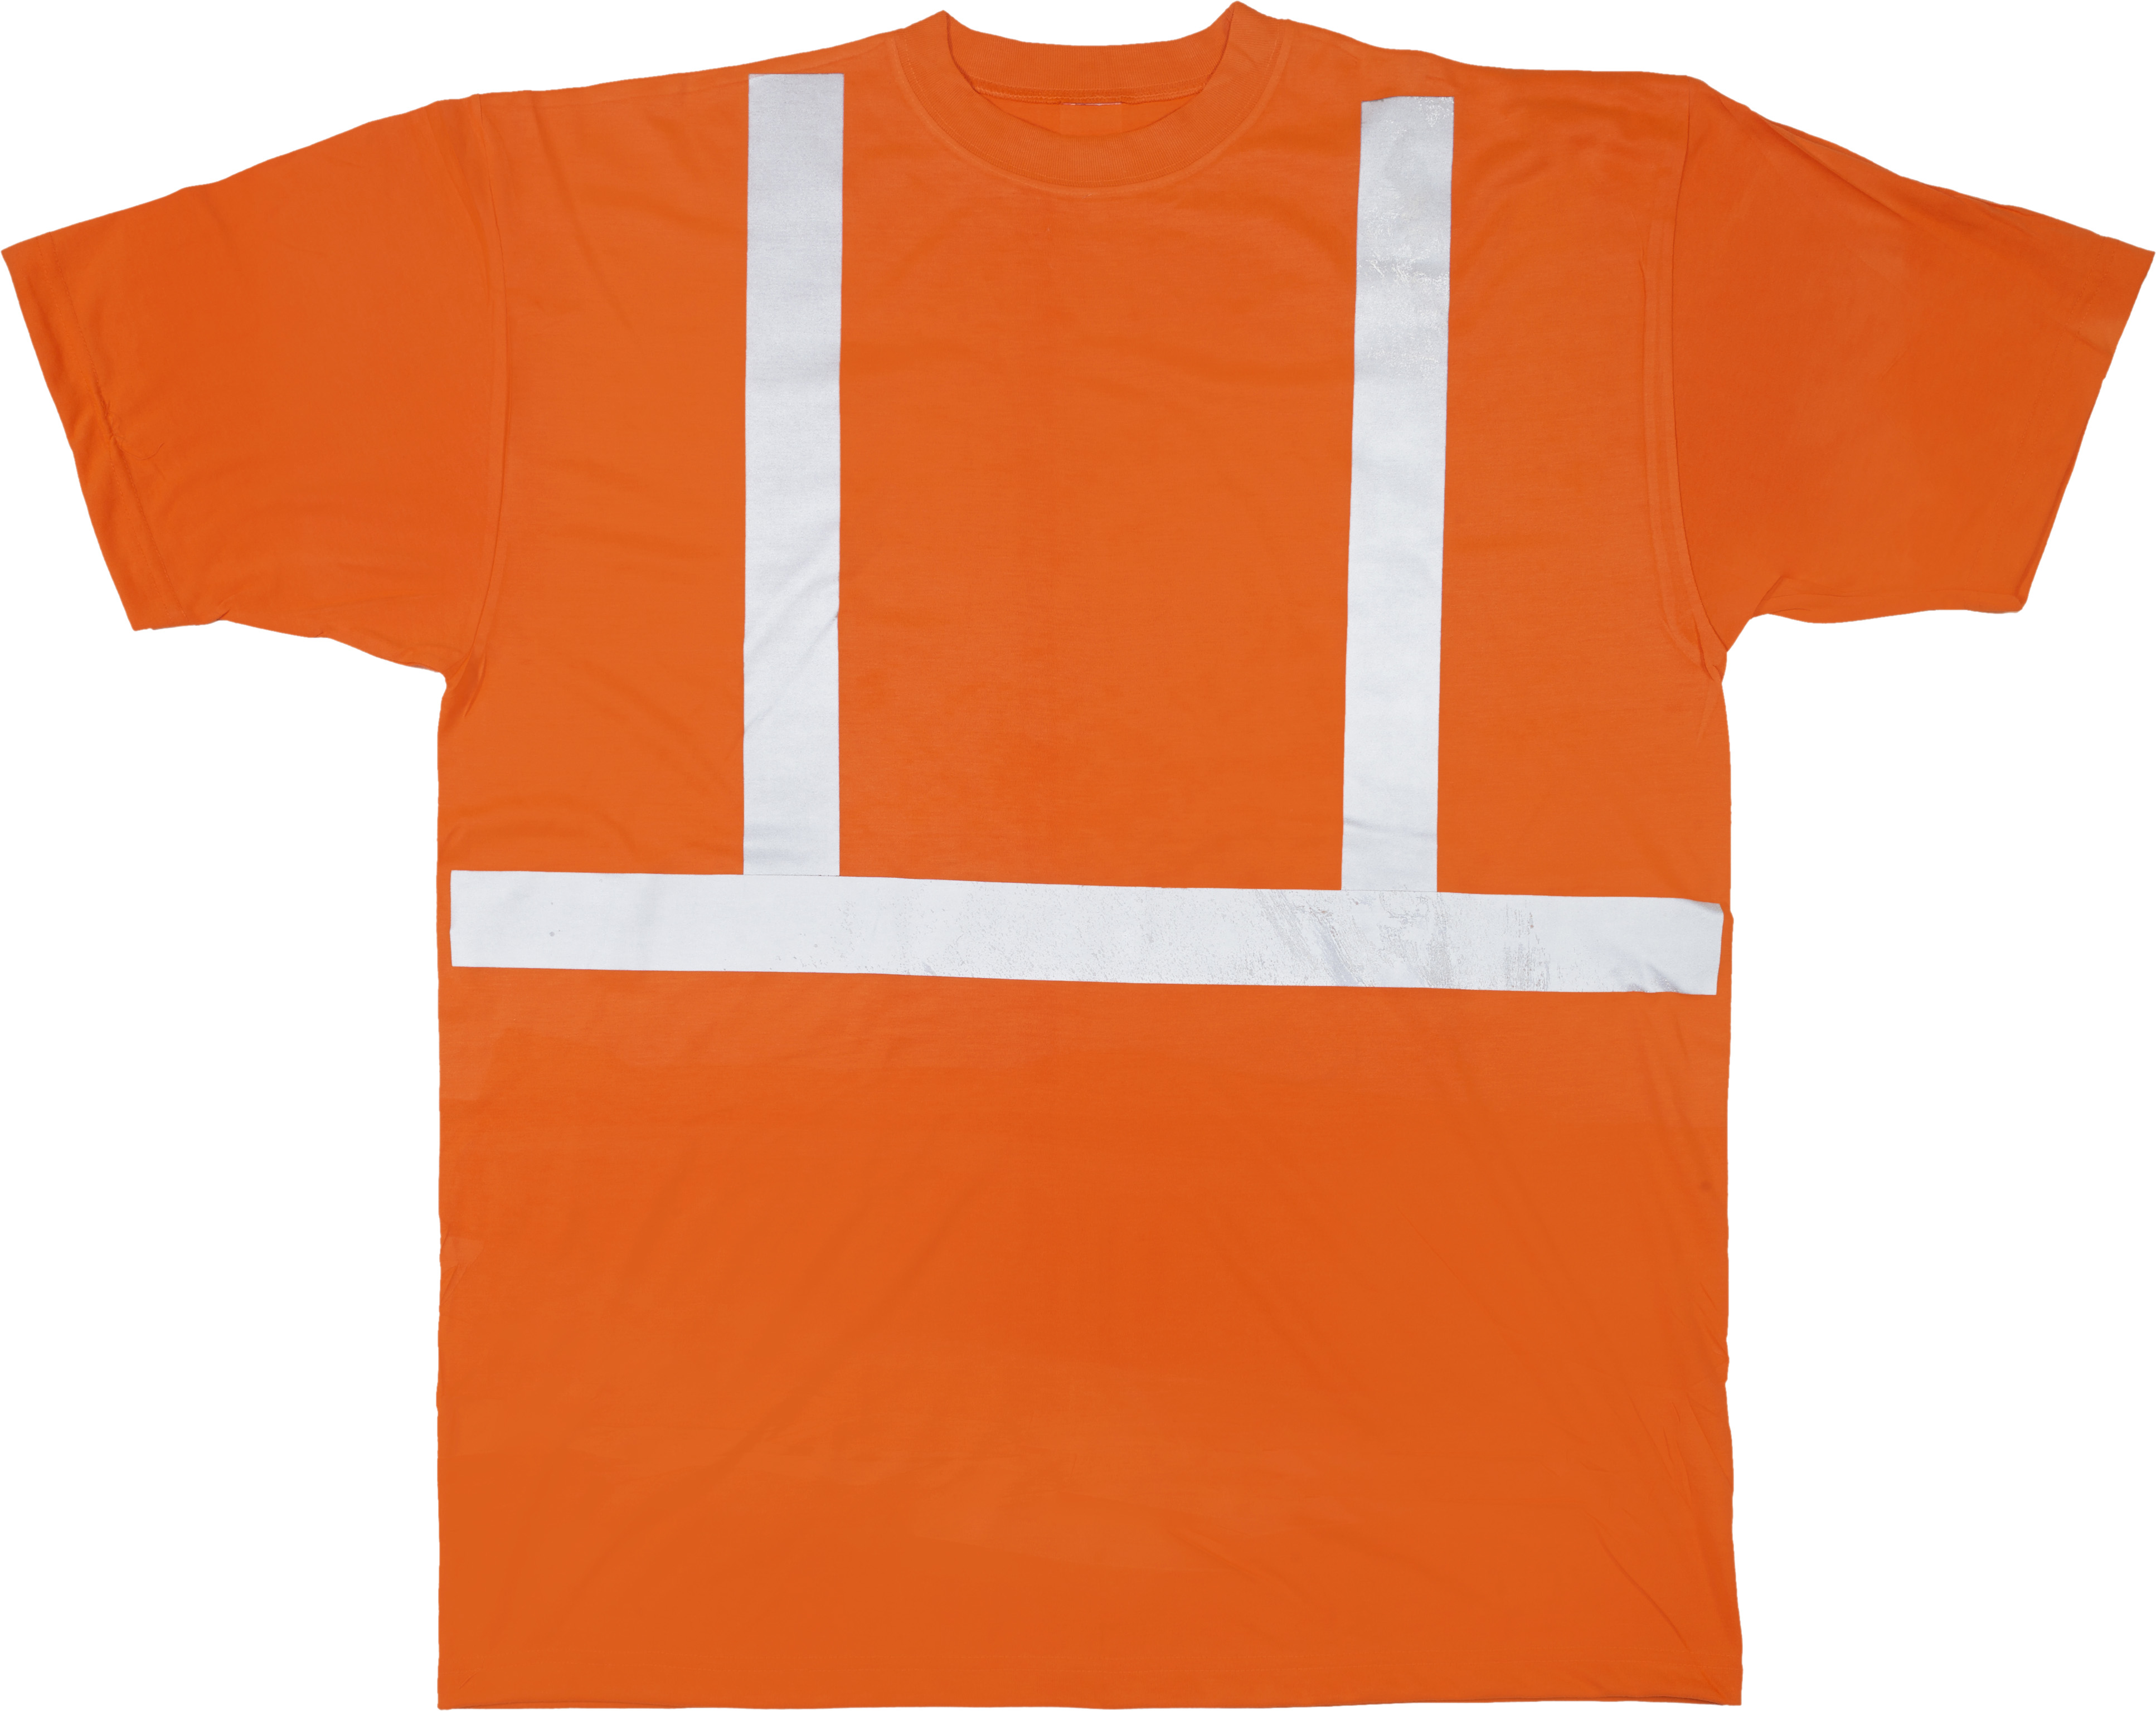 M16357-0-5, High Visibility Polyester ANSI Class 2 Safety Tee Shirt with 2 Reflective Silver Stripes, 2X-Large, Orange, Mega Safety Mart